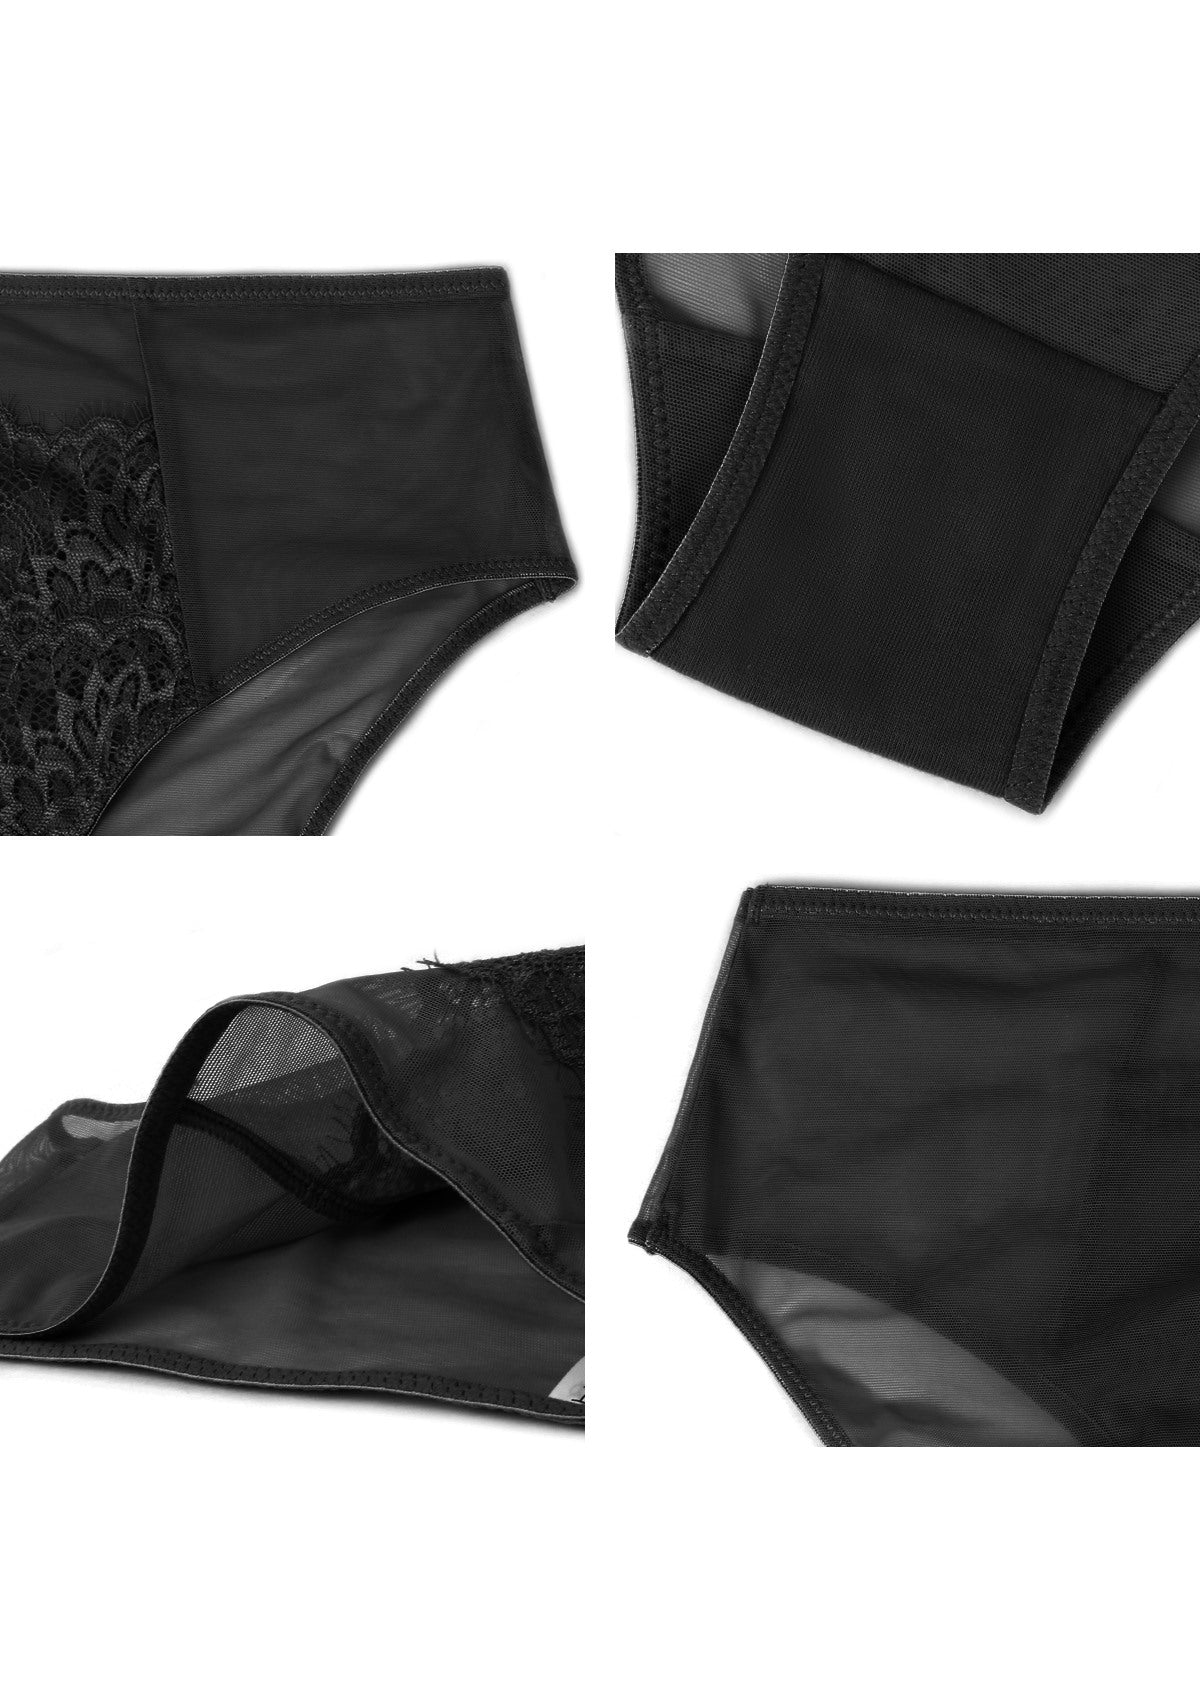 HSIA Spring Romance High-Rise Floral Lacy Panty-Comfort In Style - M / Black